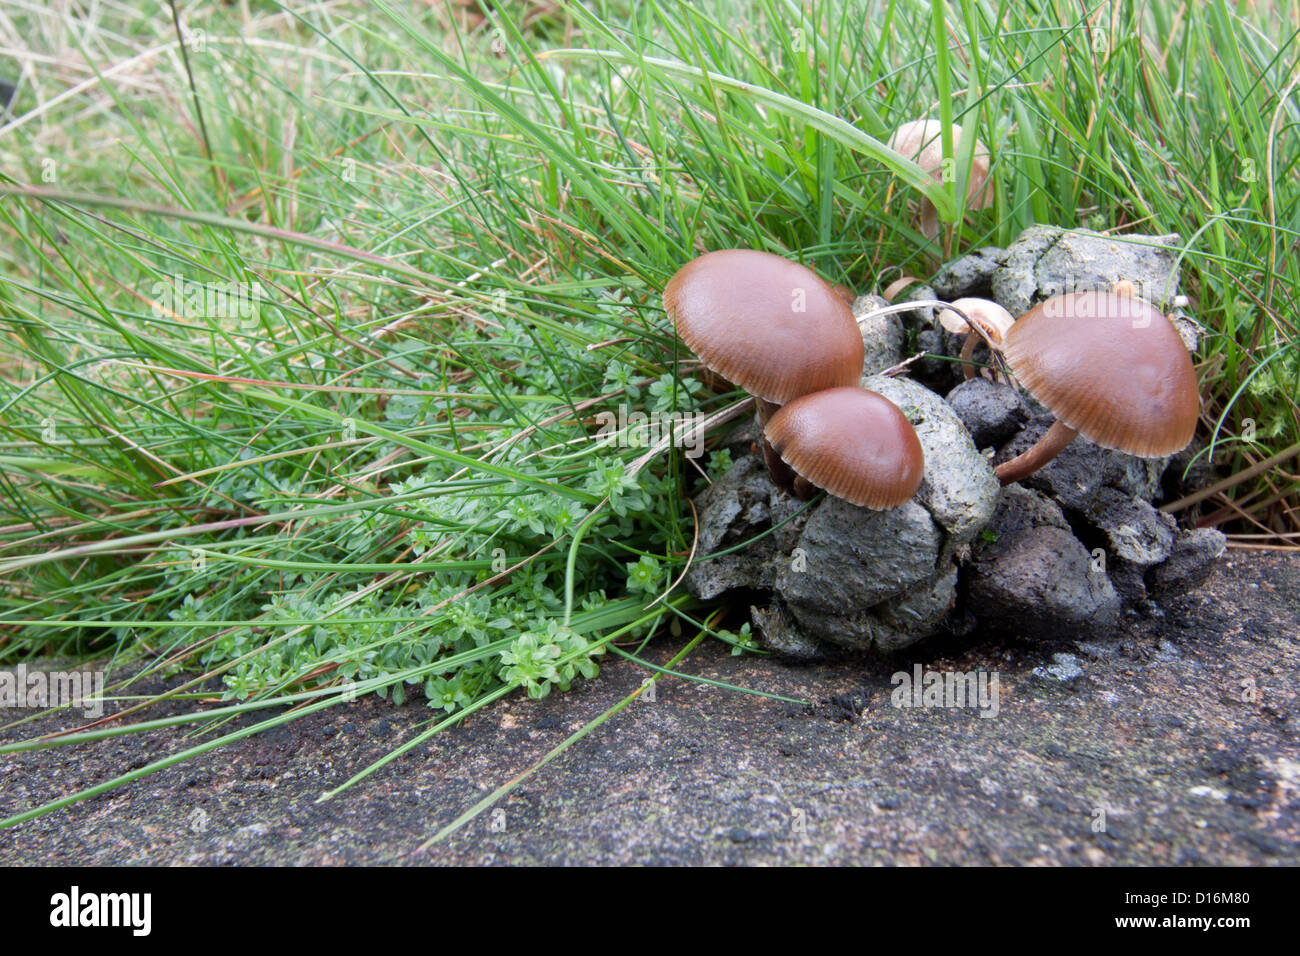 Fungus growing on droppings Stock Photo